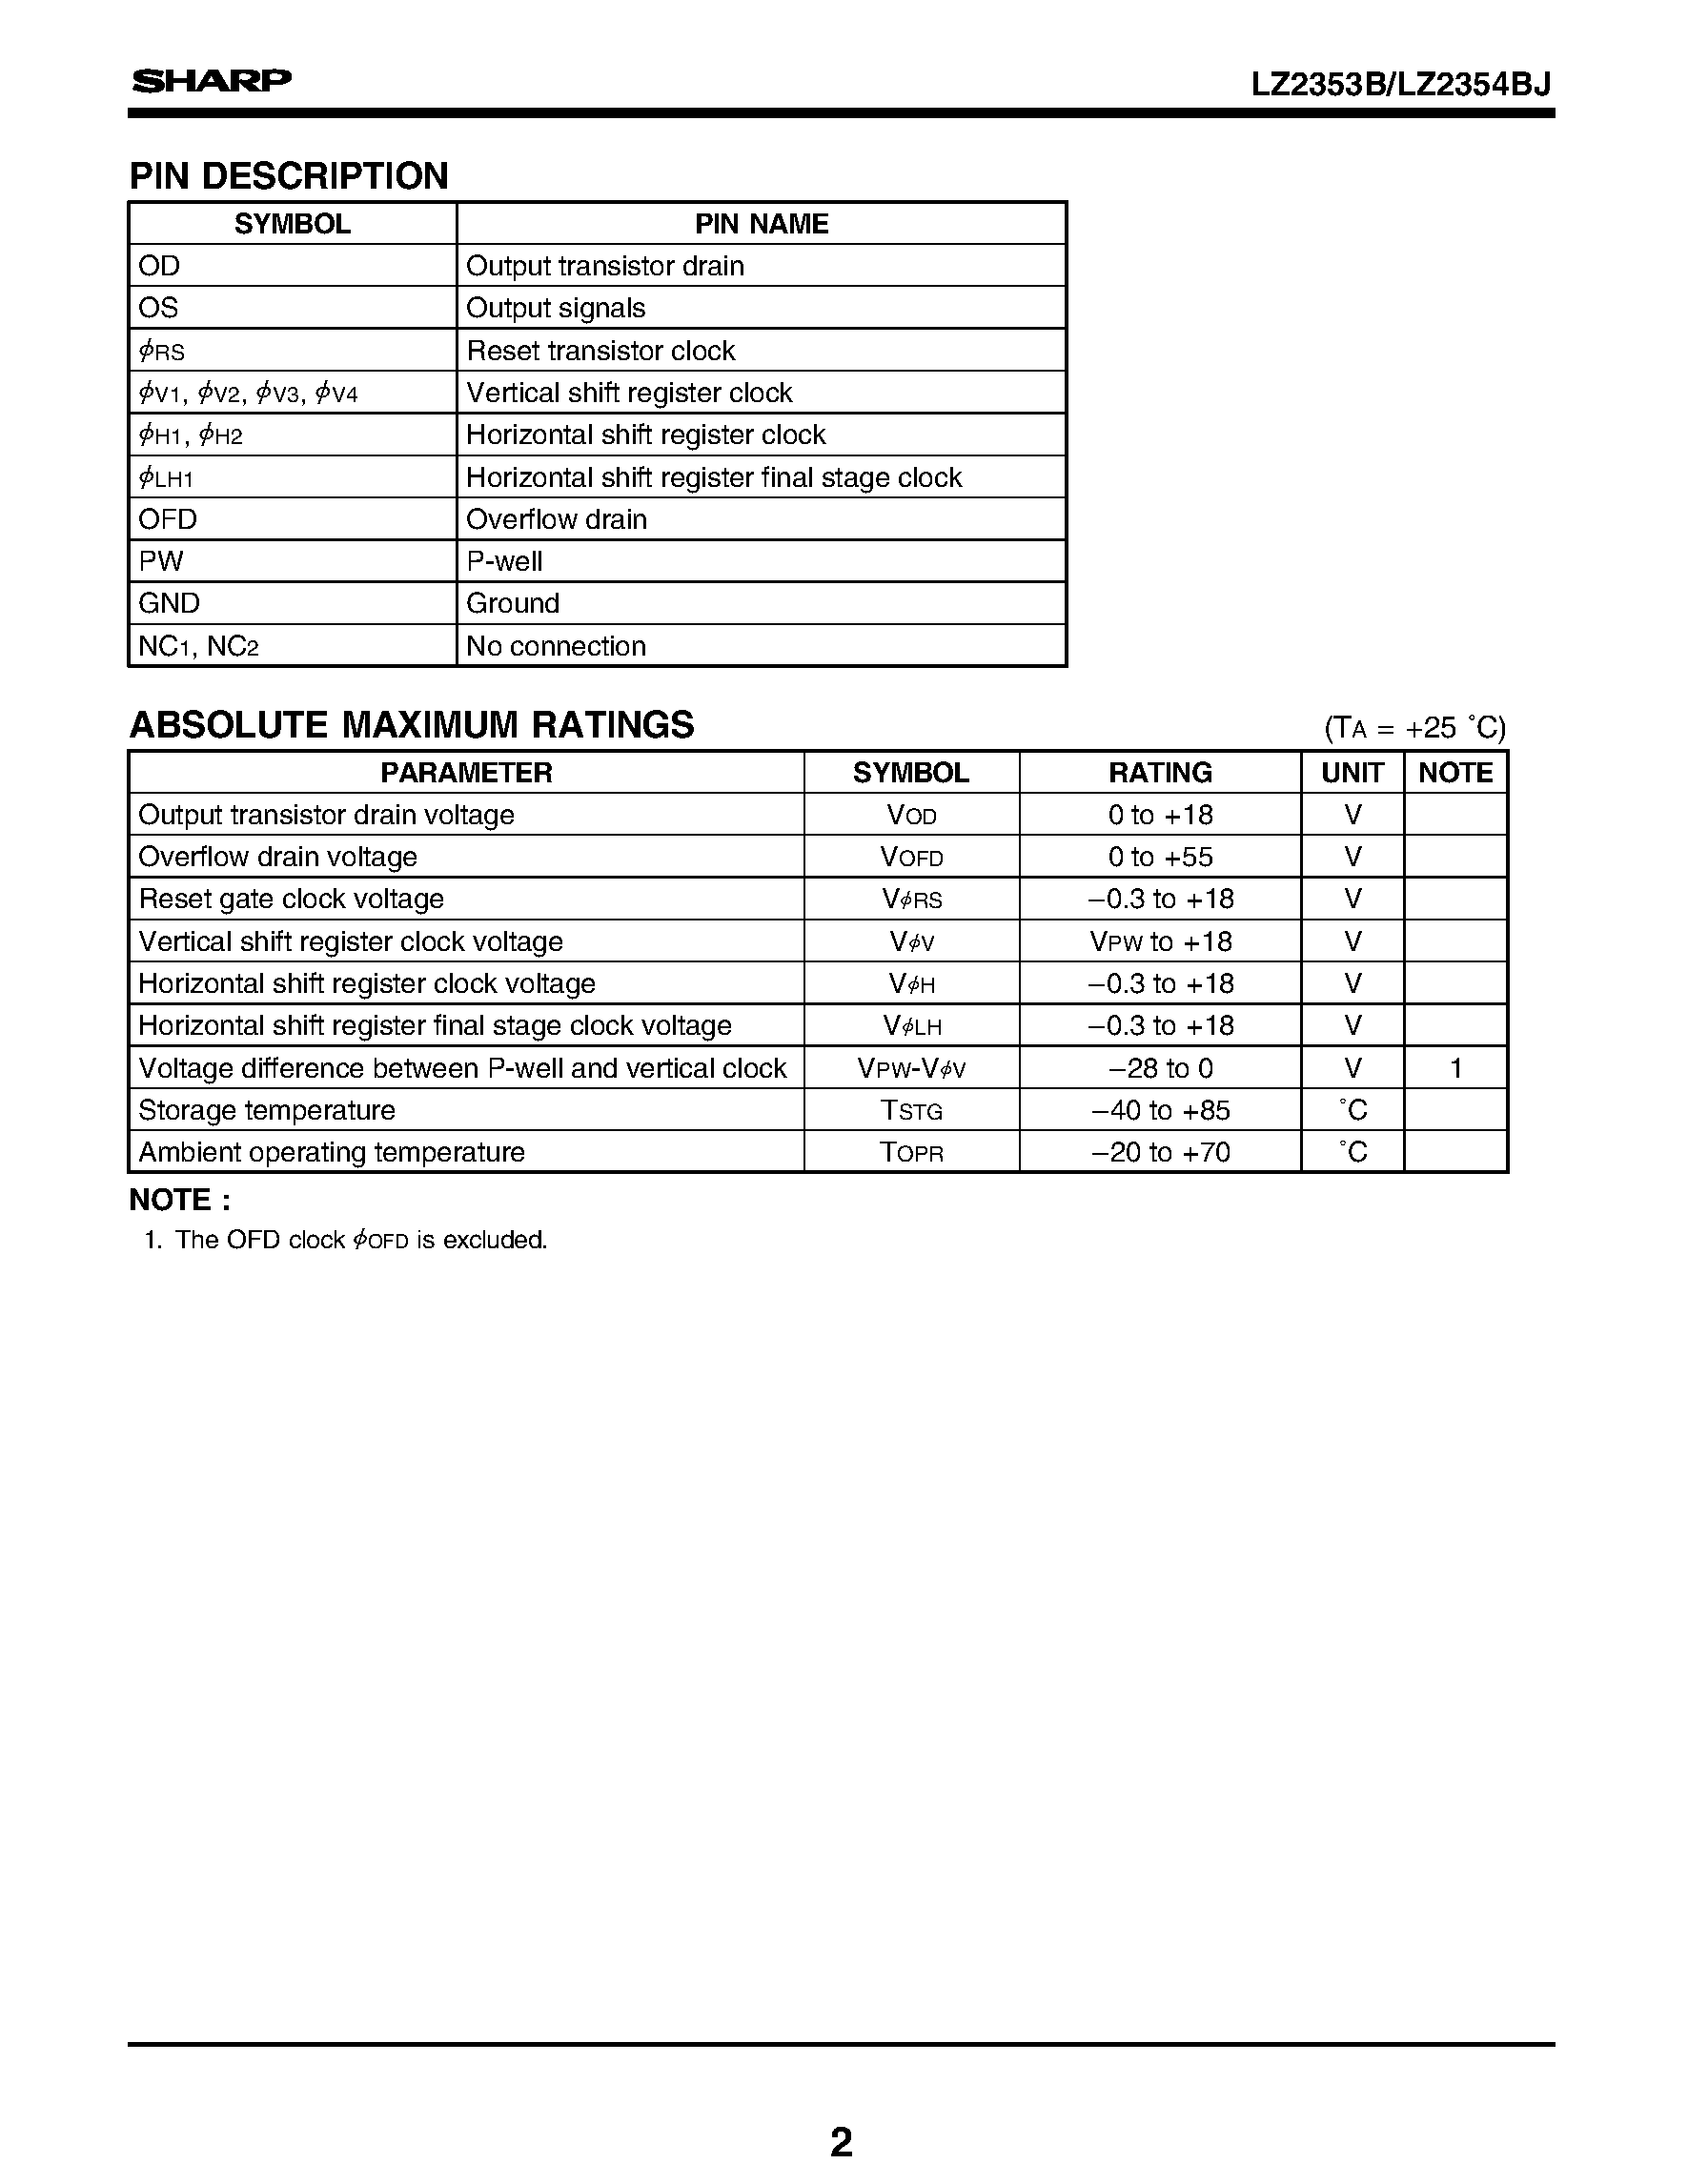 Datasheet LZ2354BJ - 1/3-type CCD Area Sensors with 410 k Pixels page 2